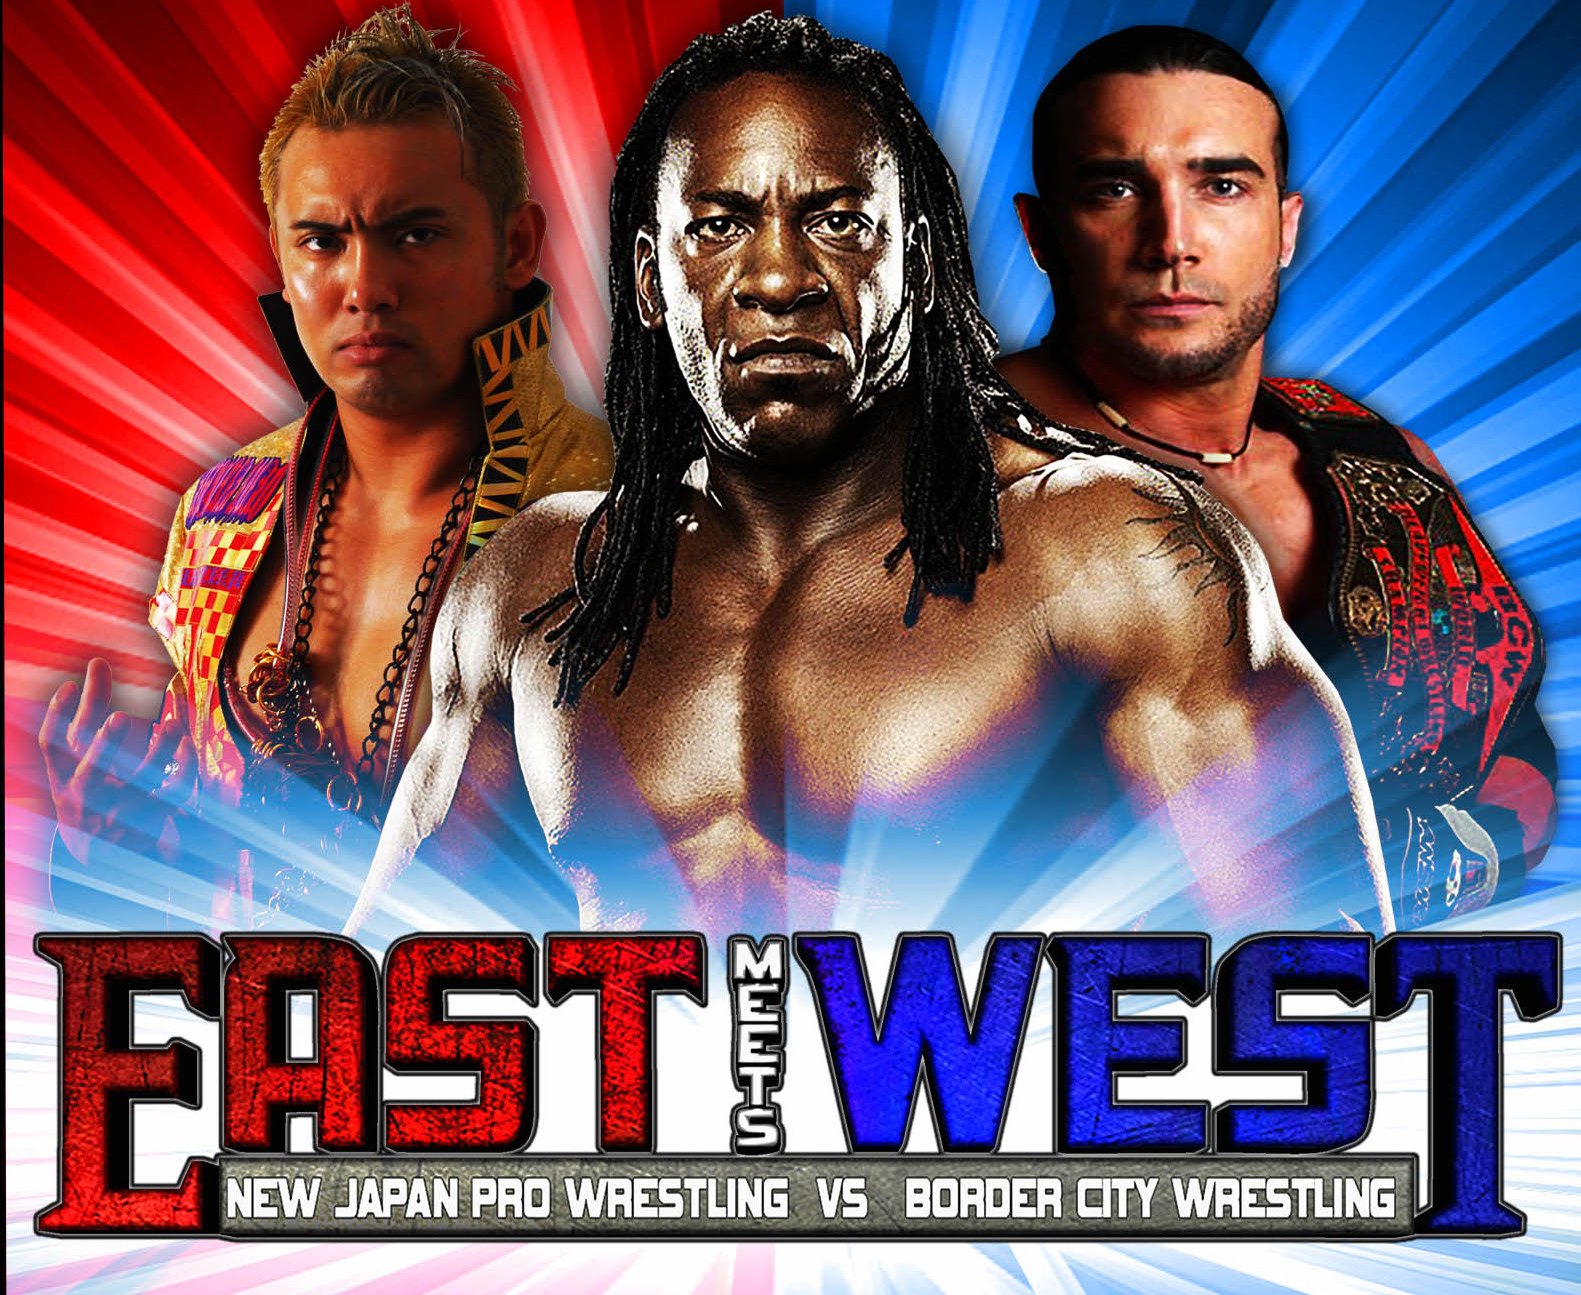 Border City Wrestling “East Meets West” DVD available now